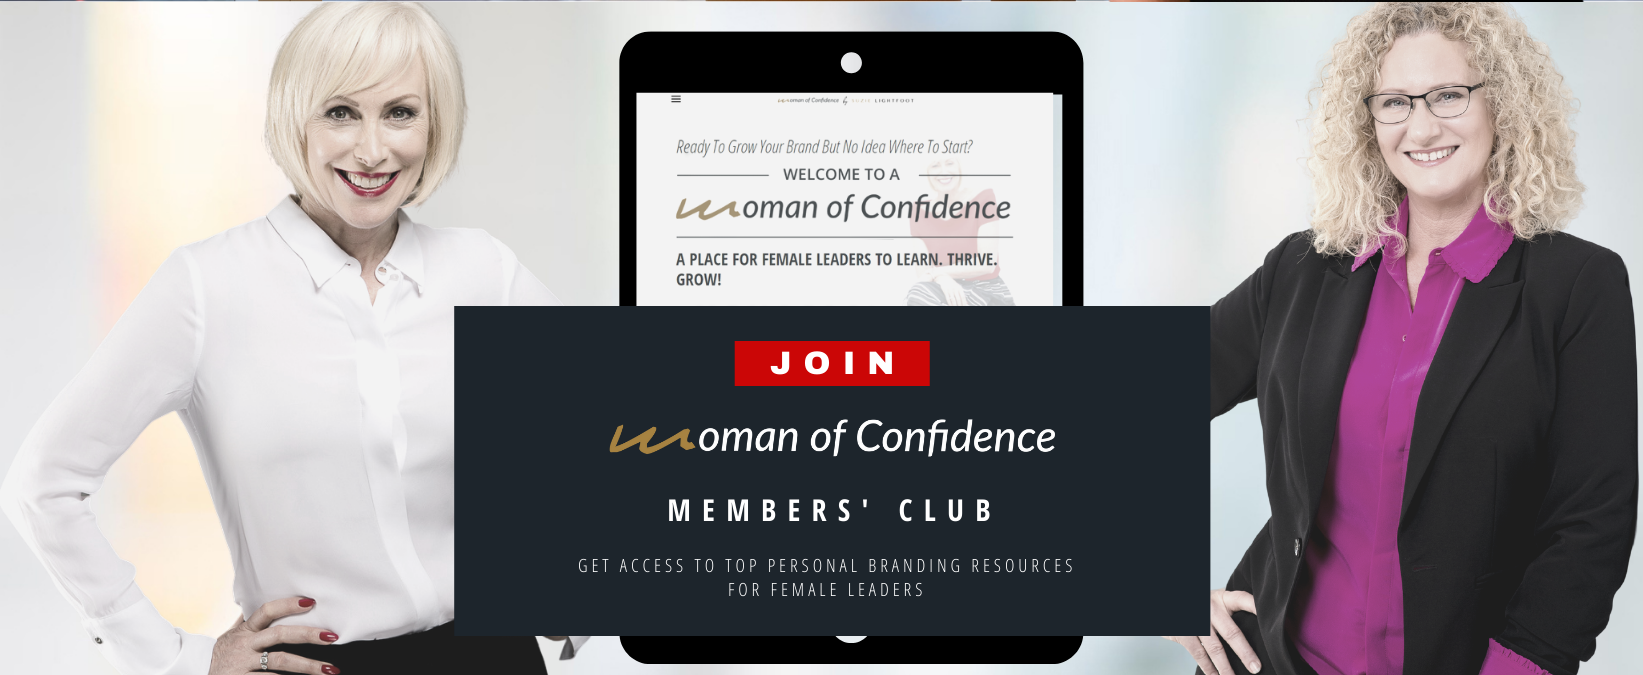 Woman of Confidence Member's Club by Suzie Lightfoot